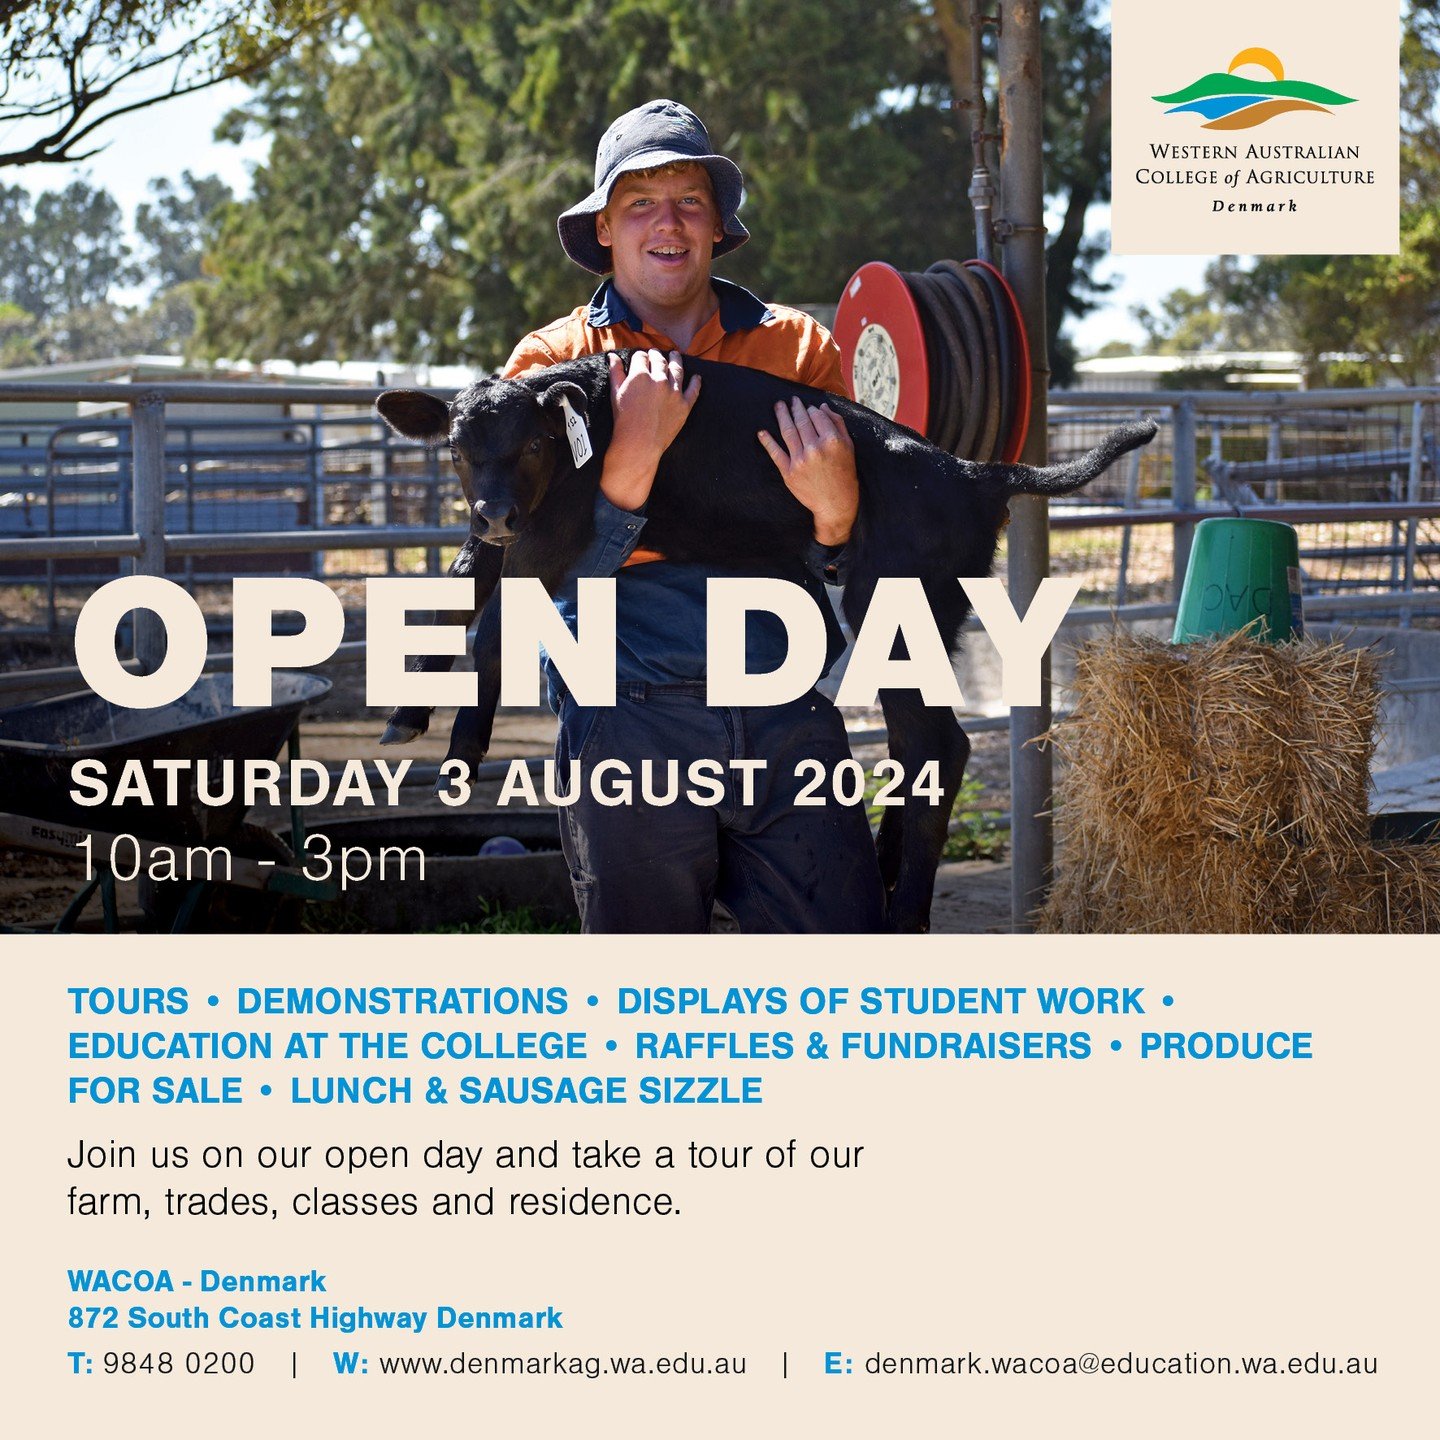 Mark your calendar for our Open Day!
Join us on 3rd August 2024 for a fun and informative day filled with tours, demonstrations, produce for sale, raffles and plenty of food. This is one of our biggest events for the year and we take pride in showcas